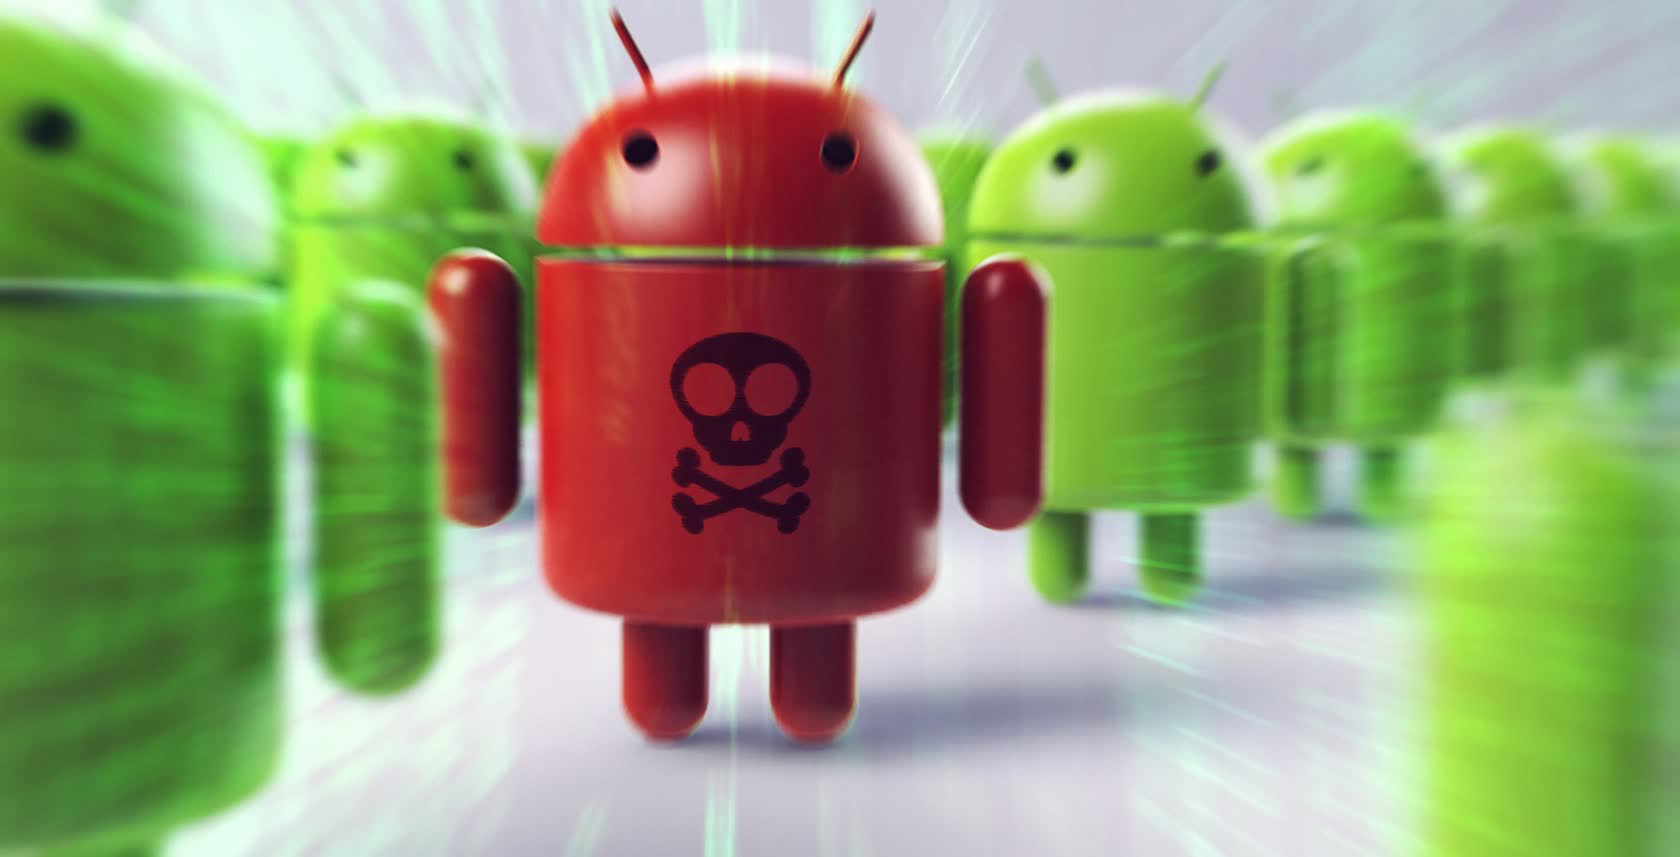 64 new variants of 'Joker' malware have invaded Android app stores